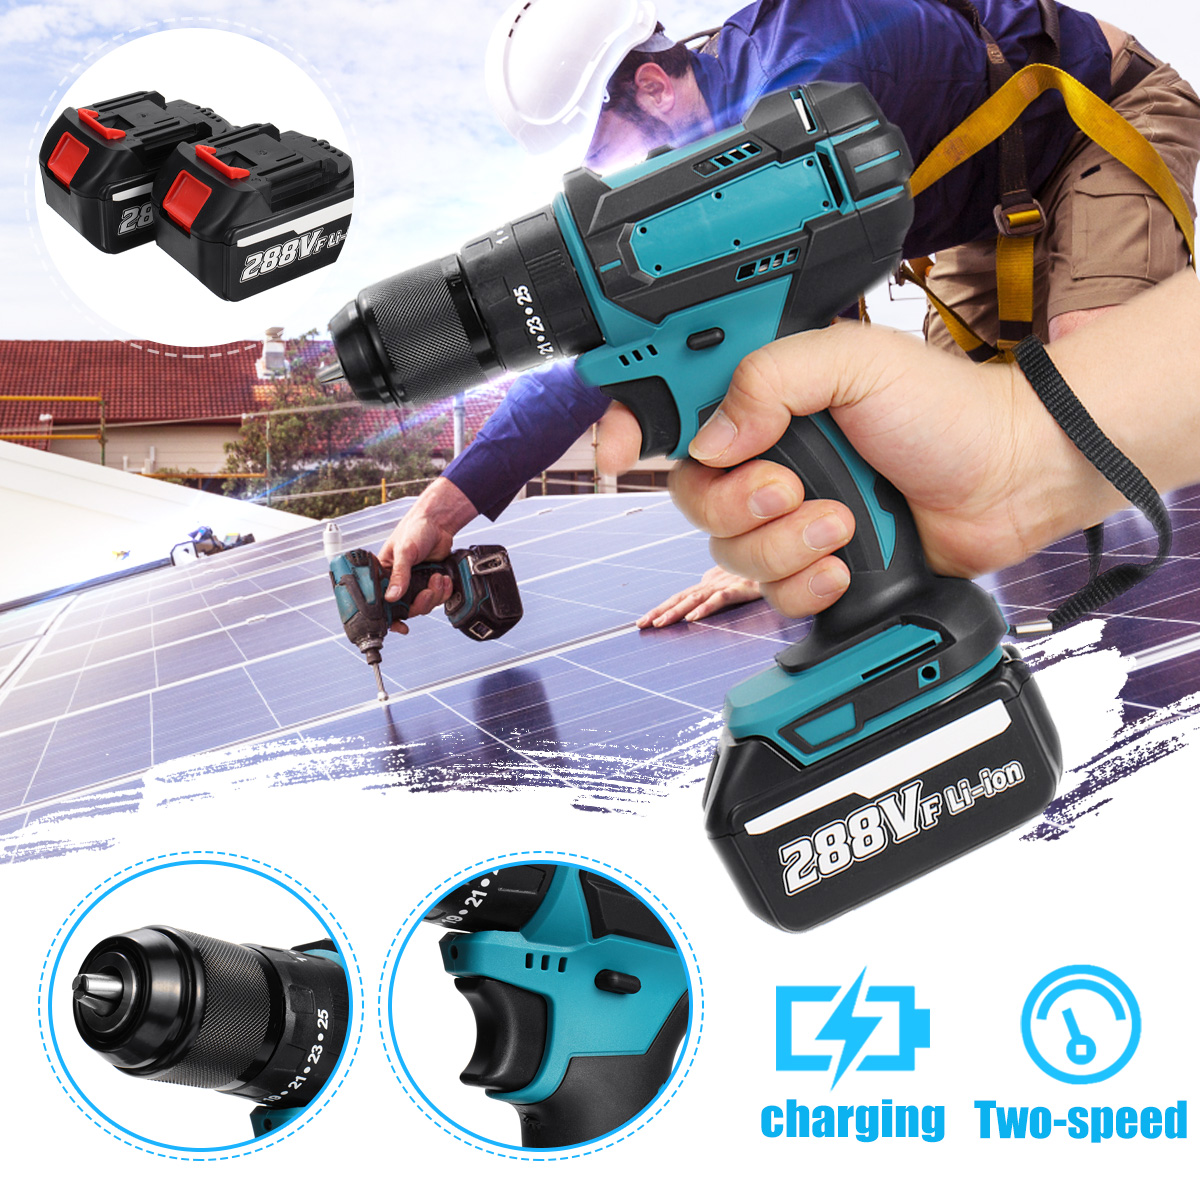 Wolike-13mm-800W-Cordless-Electirc-Impact-Drill-Driver-253-Torque-Electric-Drill-Screwdriver-1880979-4